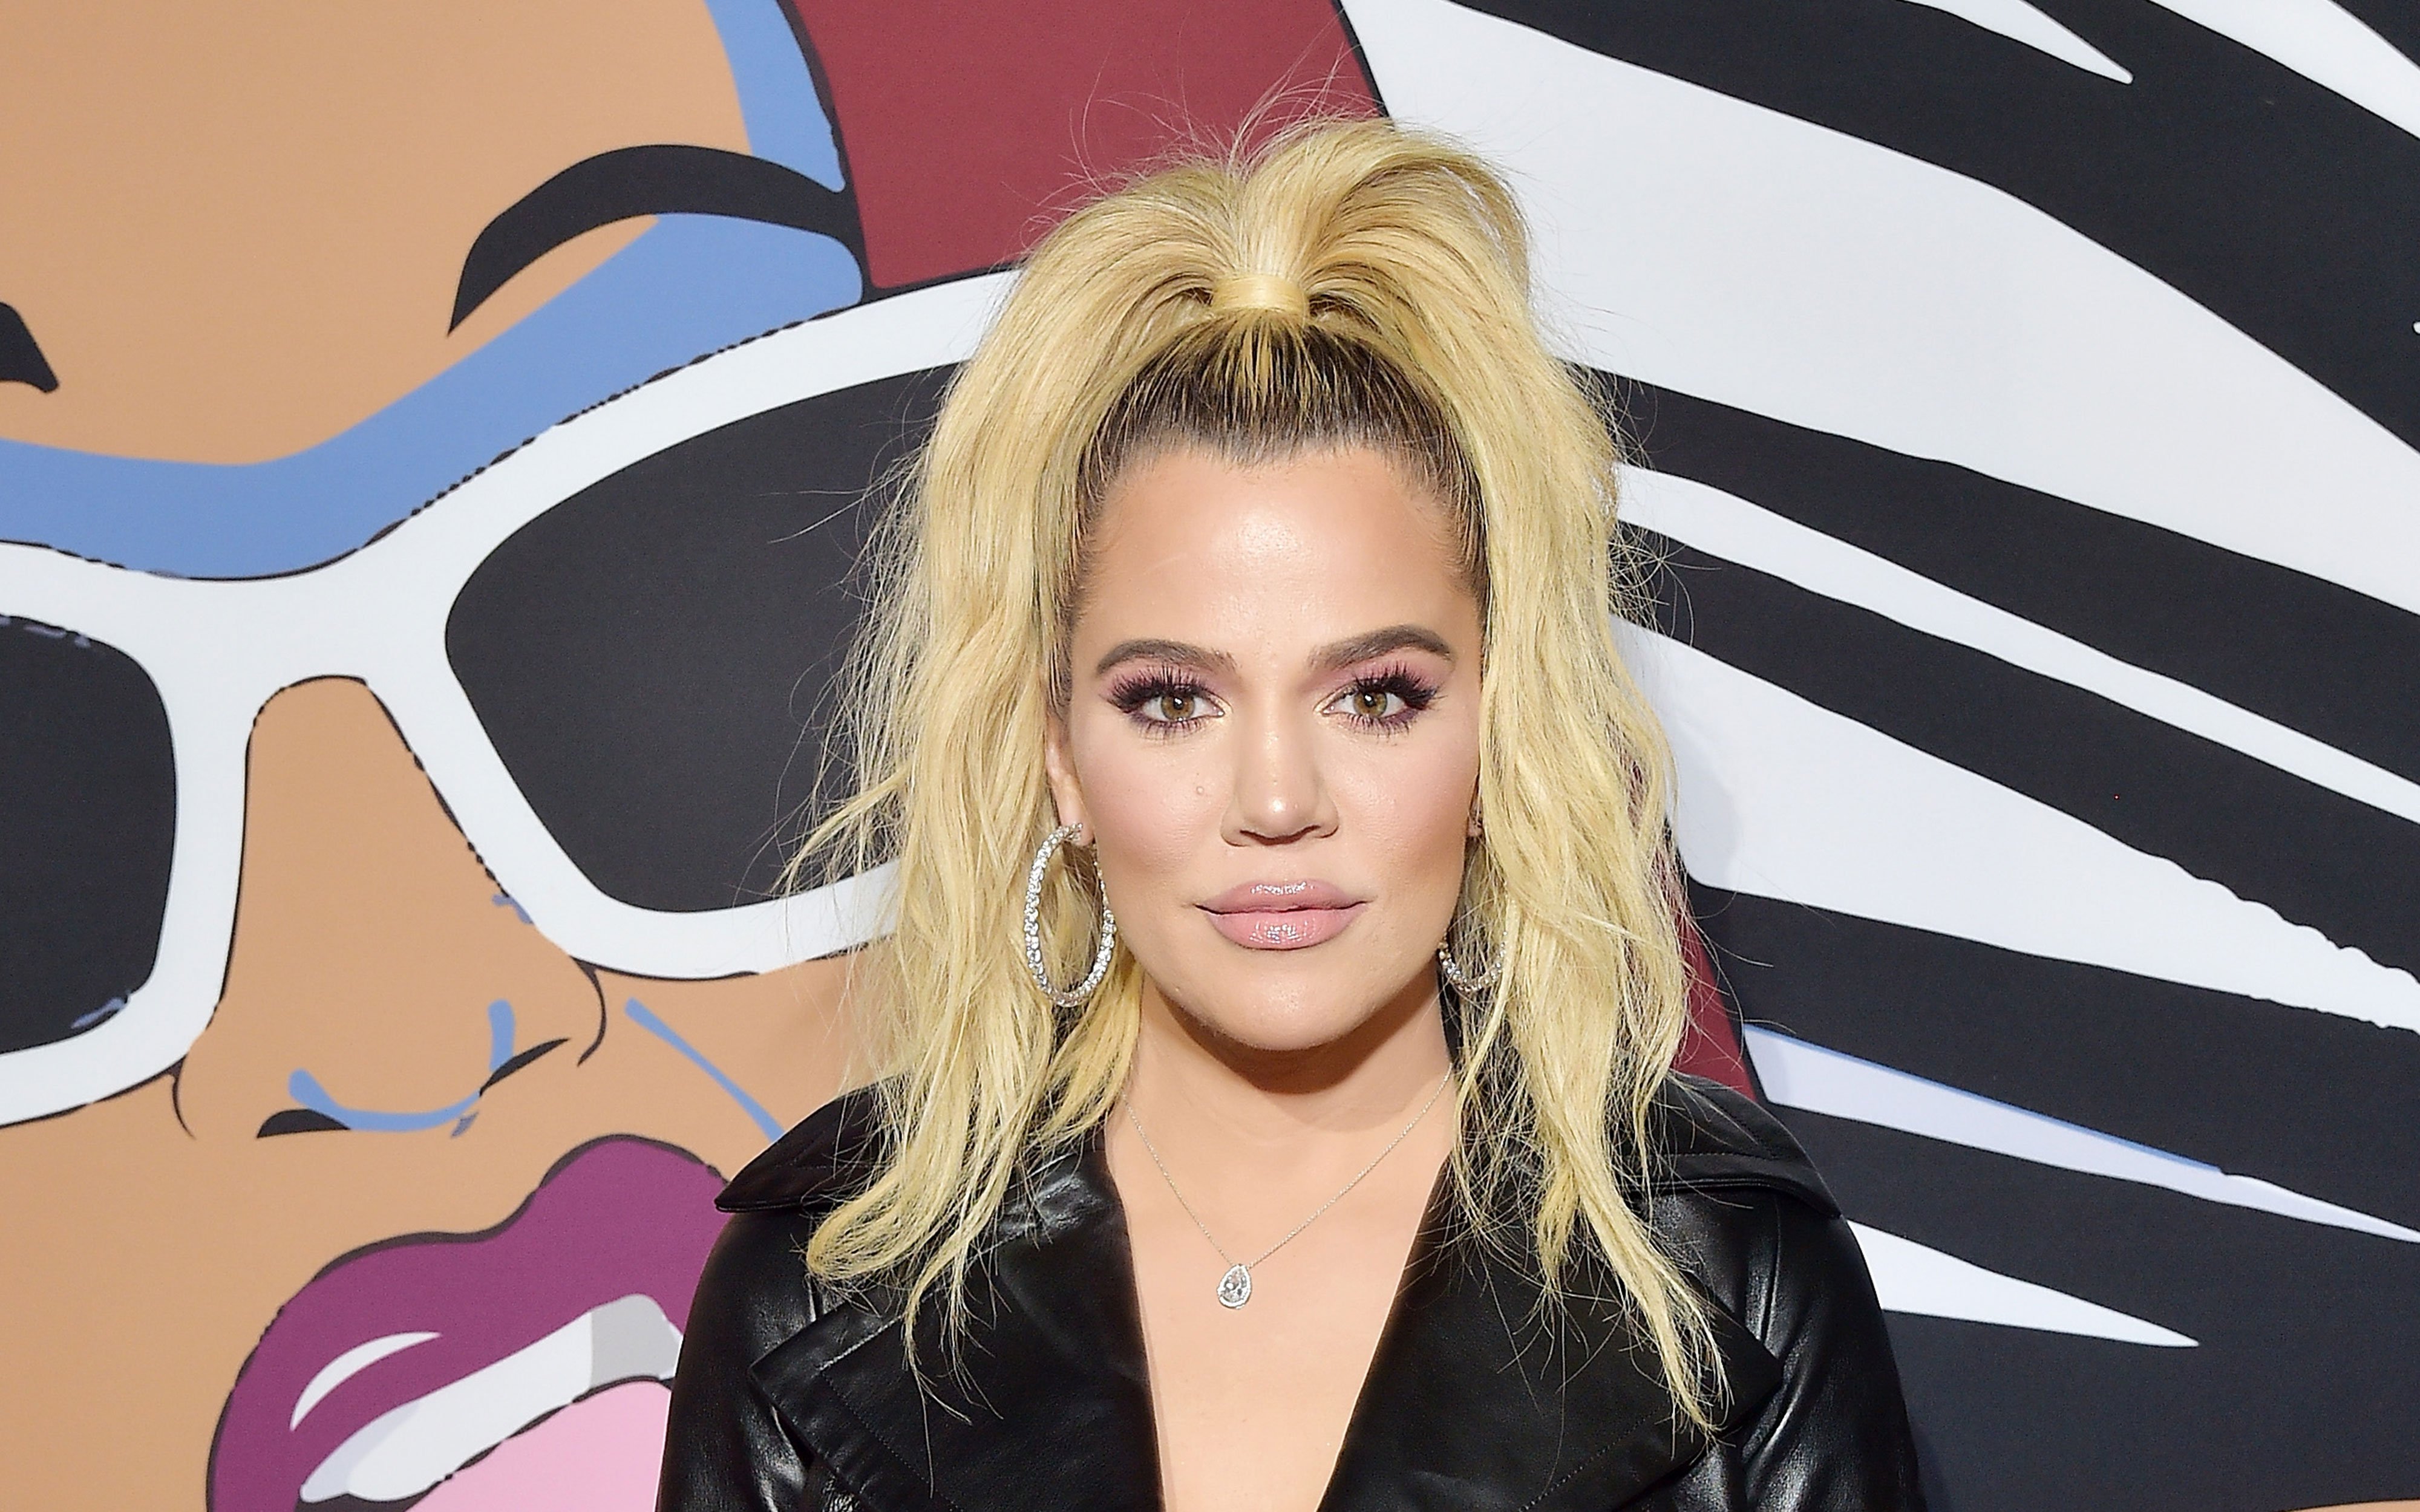 Khloé Kardashian Model Keeping Up With The Kardashians Will End Its